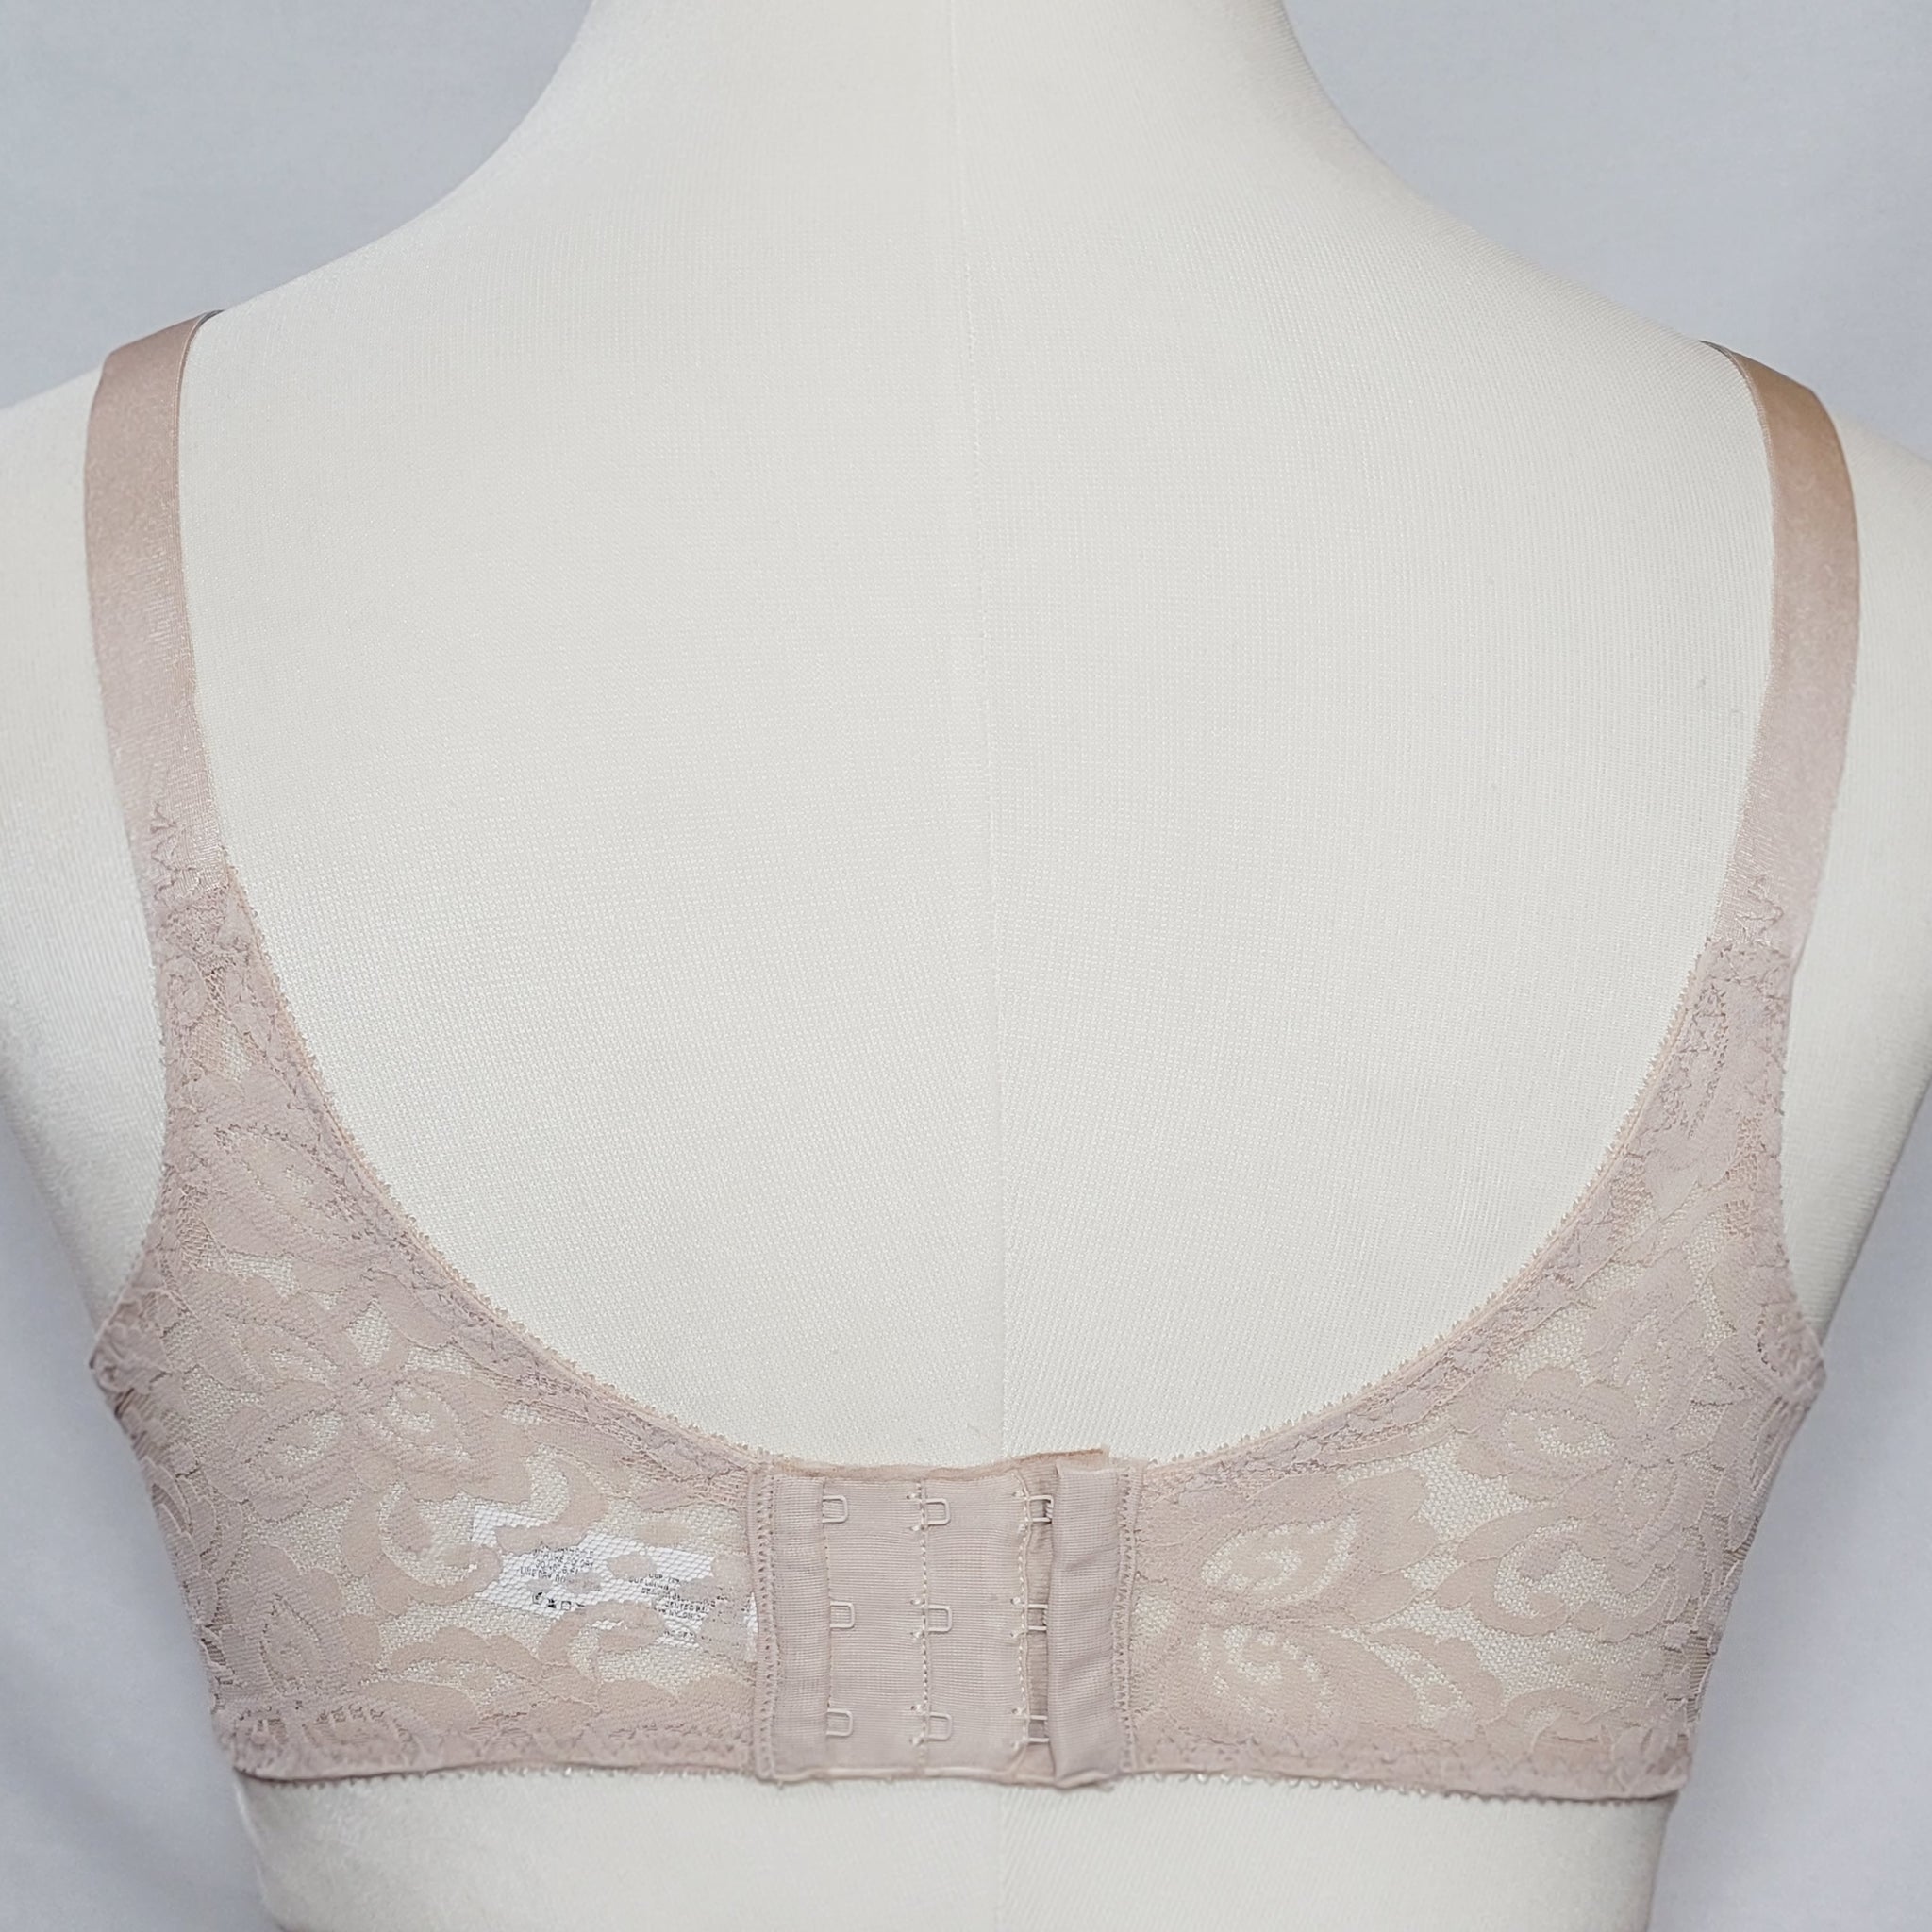 Bali Lace 'n Smooth Underwire Bra, Rosewood, 40C at  Women's Clothing  store